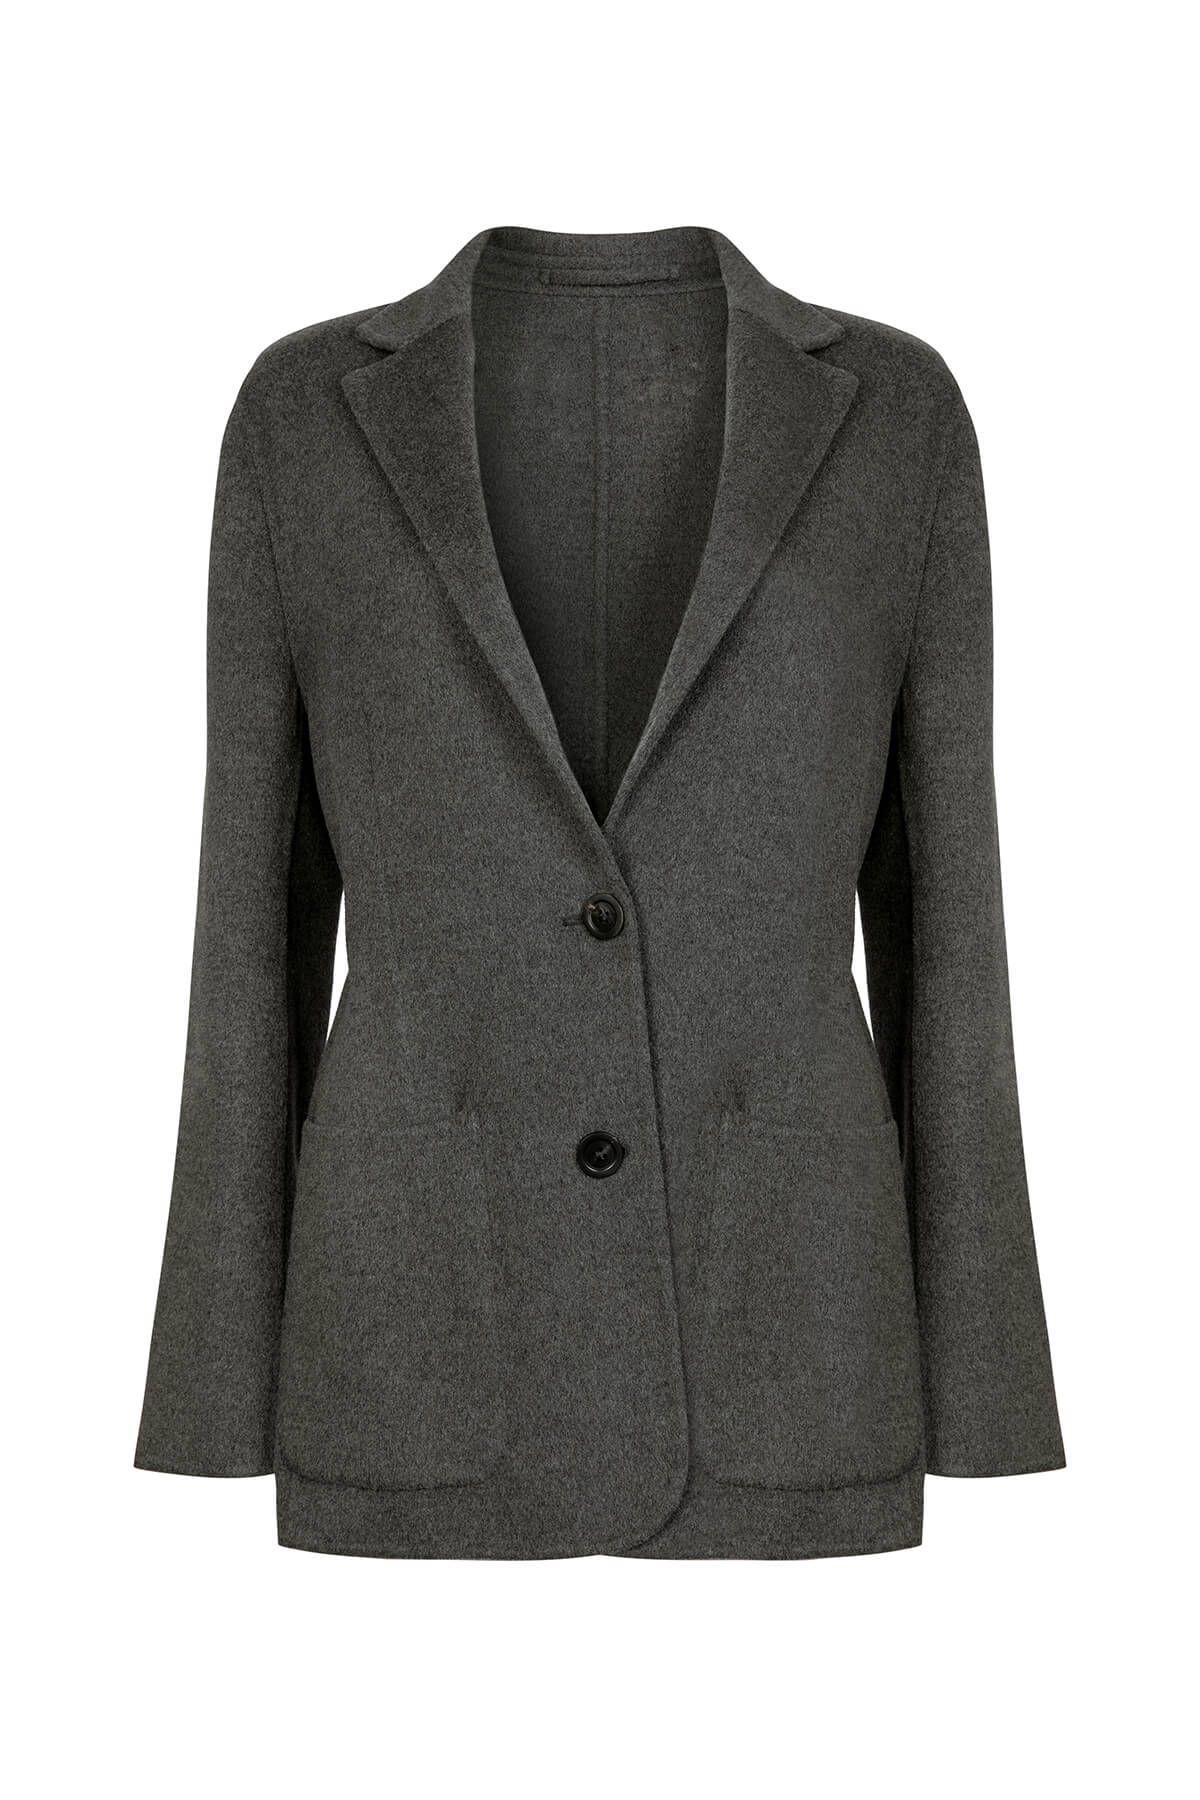 Johnstons of Elgin Women's Cashmere Double Face Boyfriend Jacket in Mid Grey on a white background TA000518RU7292